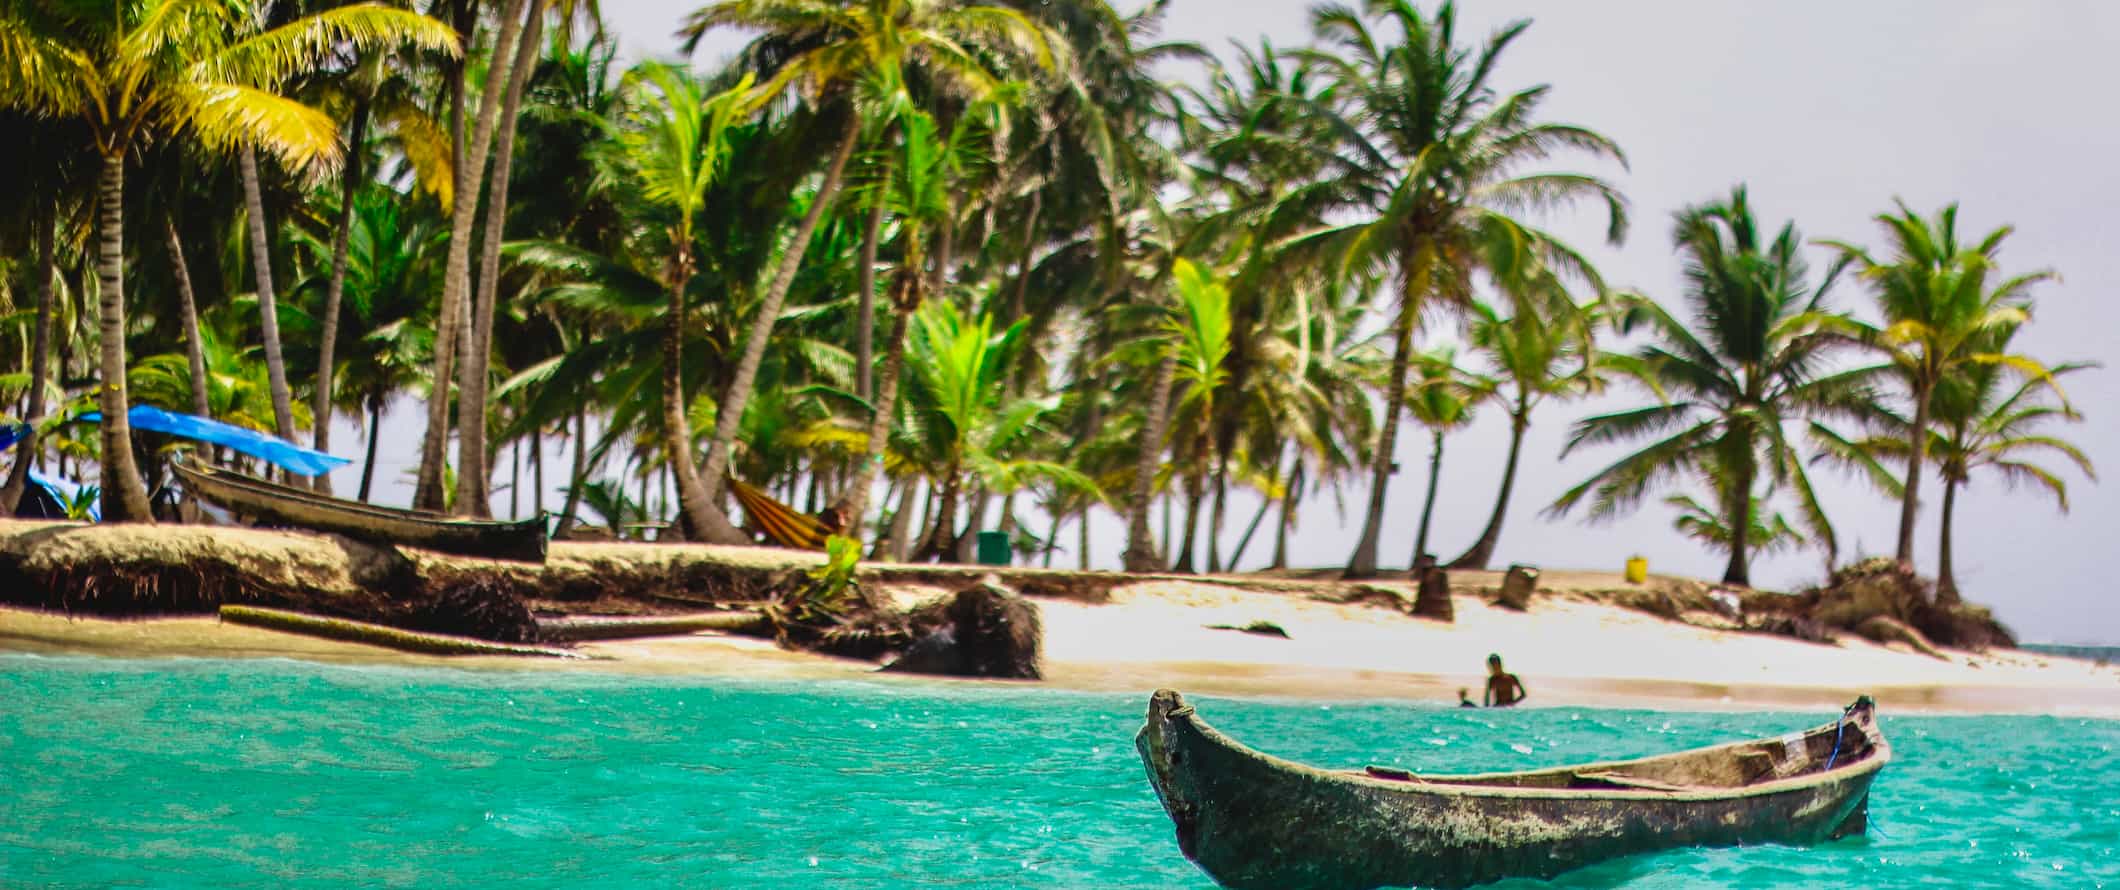 A boat along the beautiful shores of the San Blas Islands in Panama